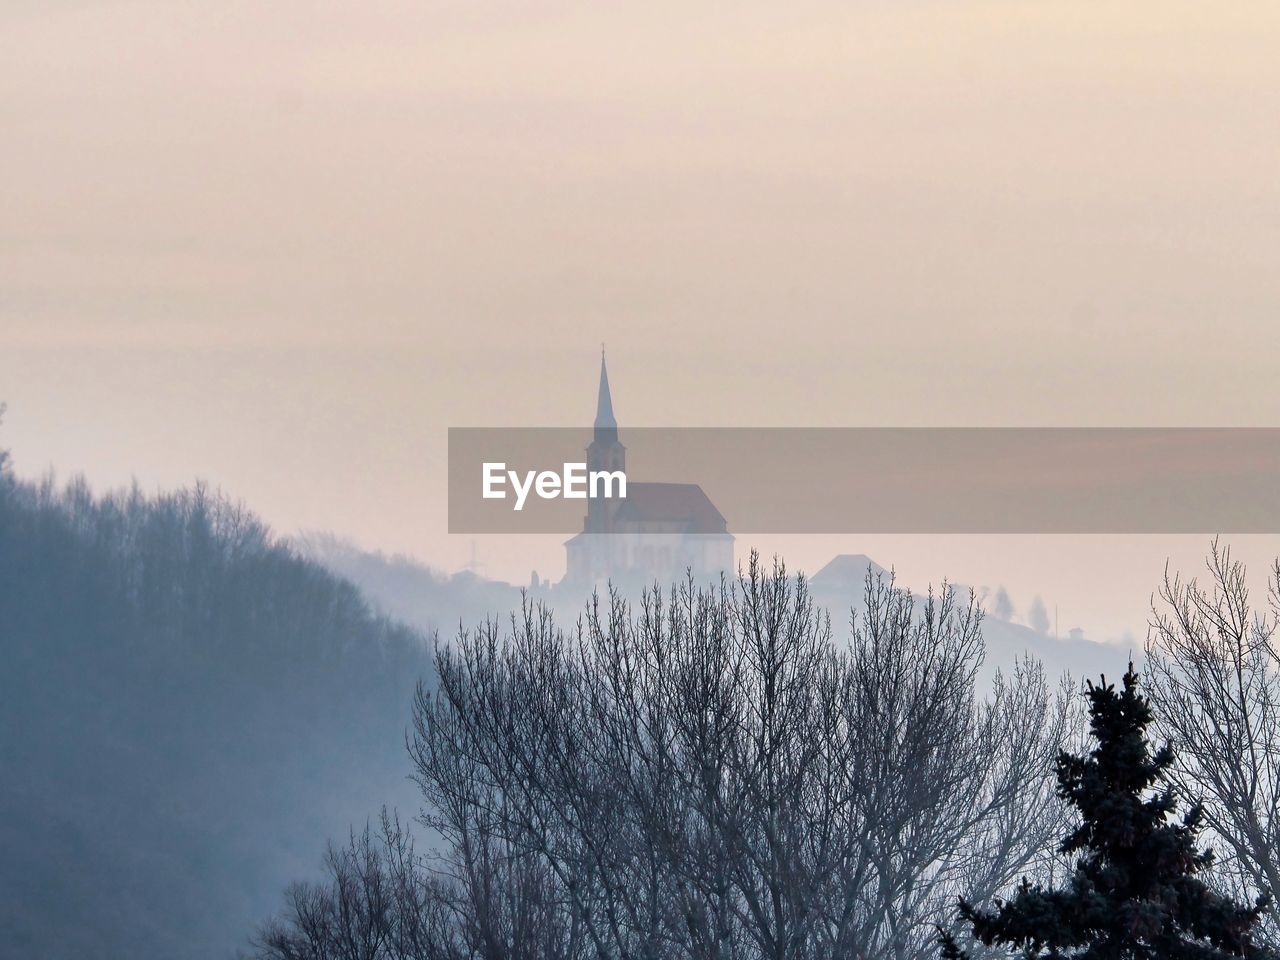 Distant view of a church on a hill behind trees